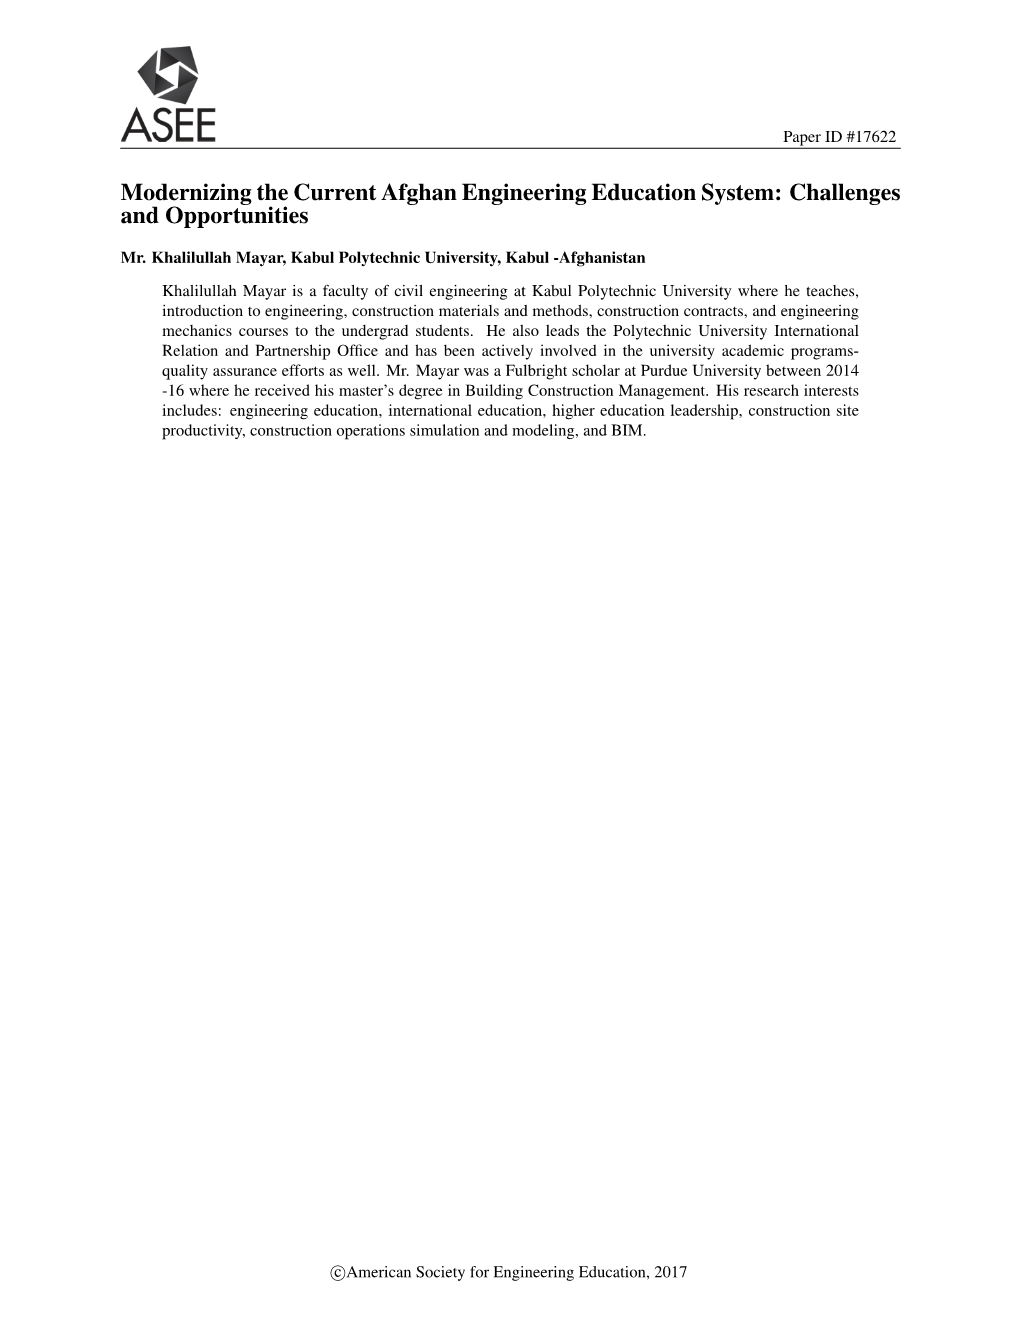 Modernizing the Current Afghan Engineering Education System: Challenges and Opportunities